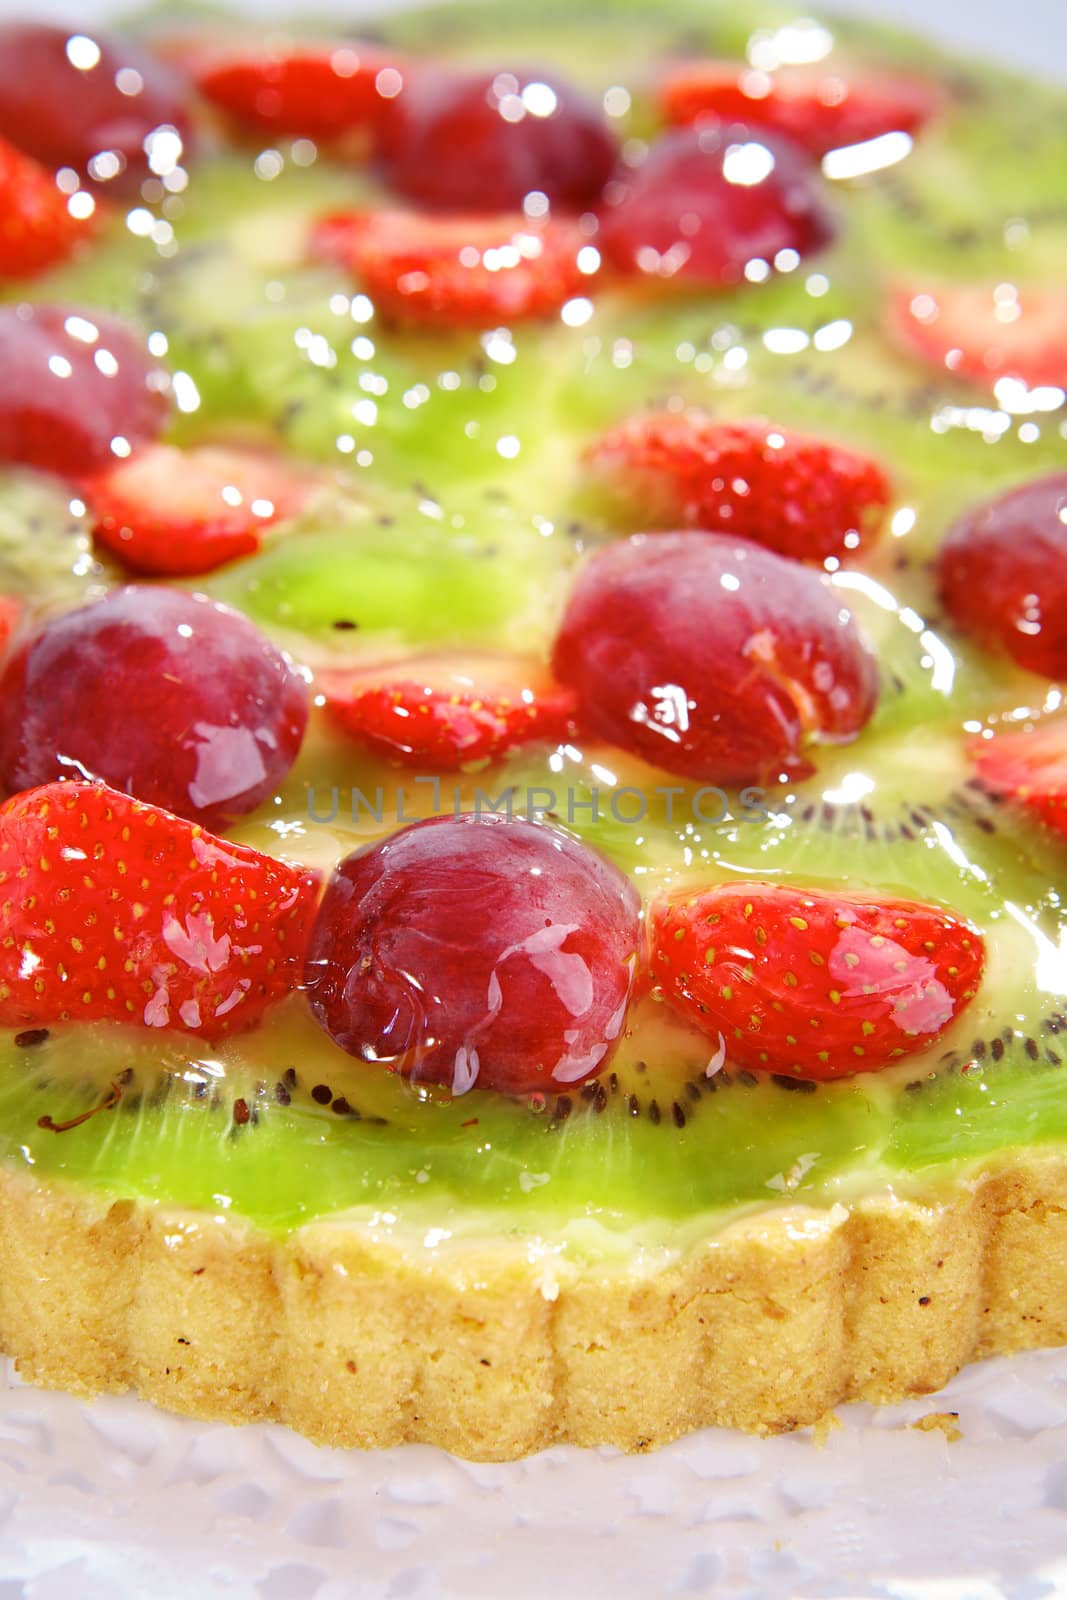 Cake with strawberries, grapes and kiwis